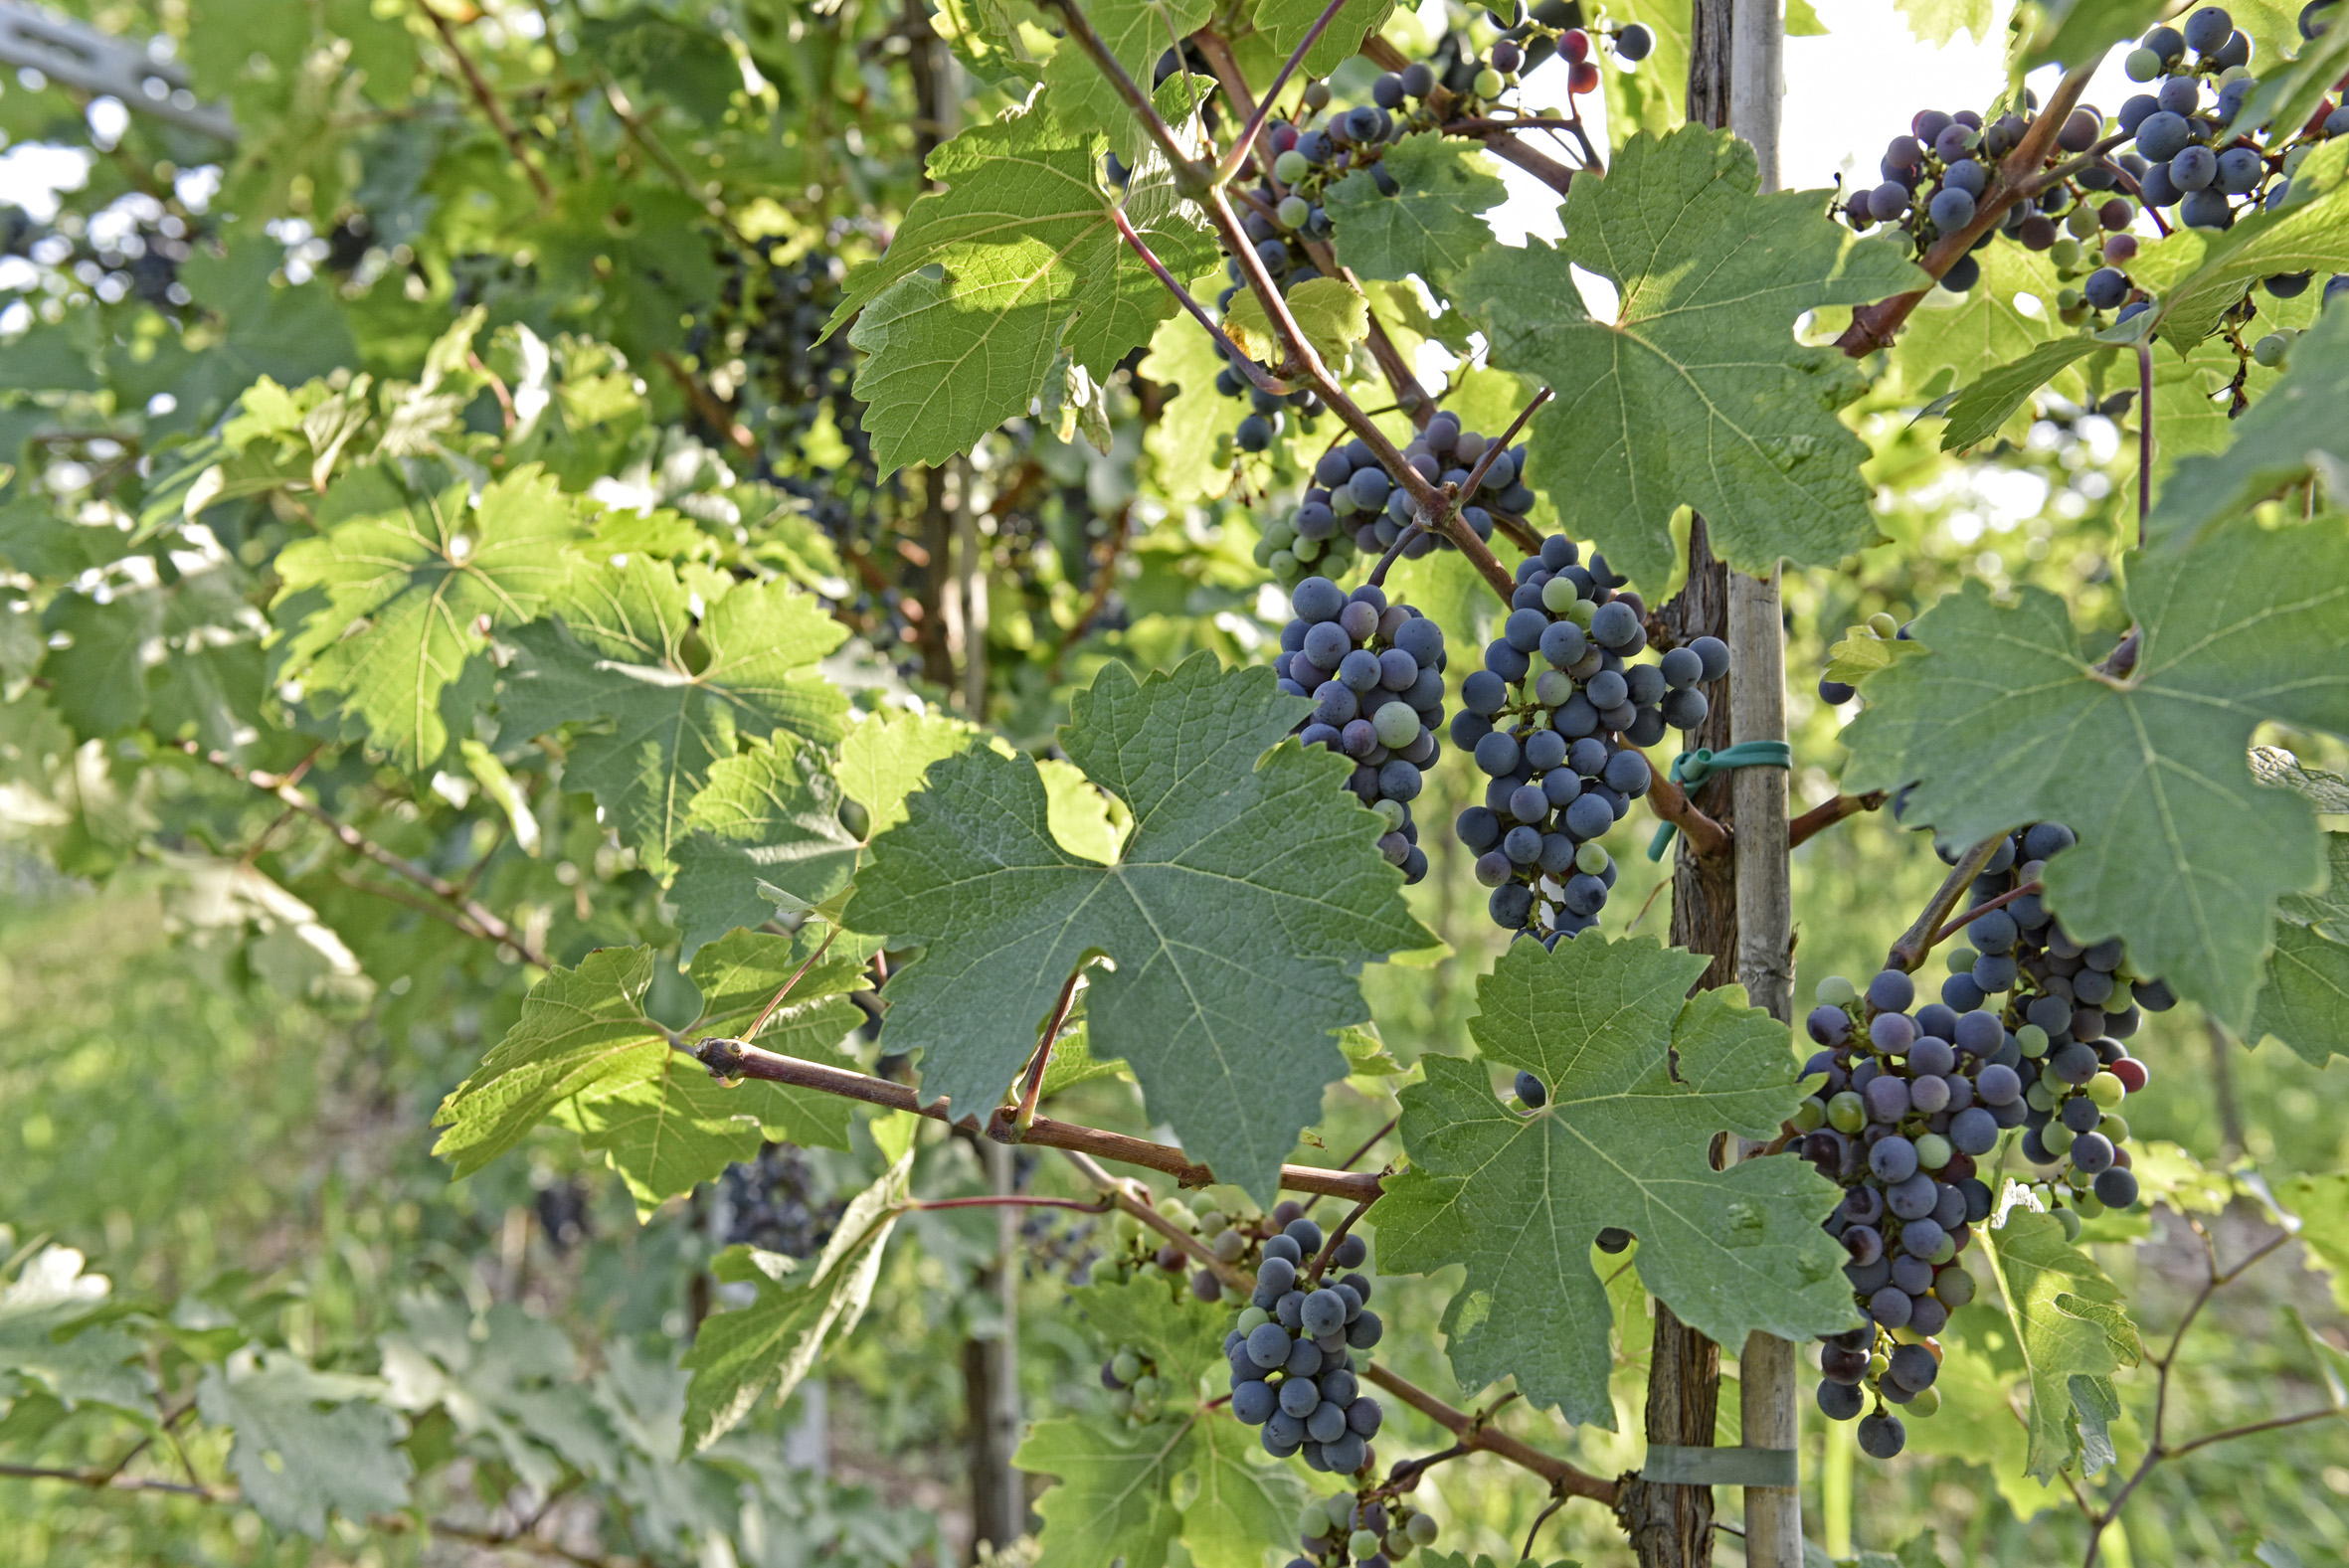 The vineyard and its fruits